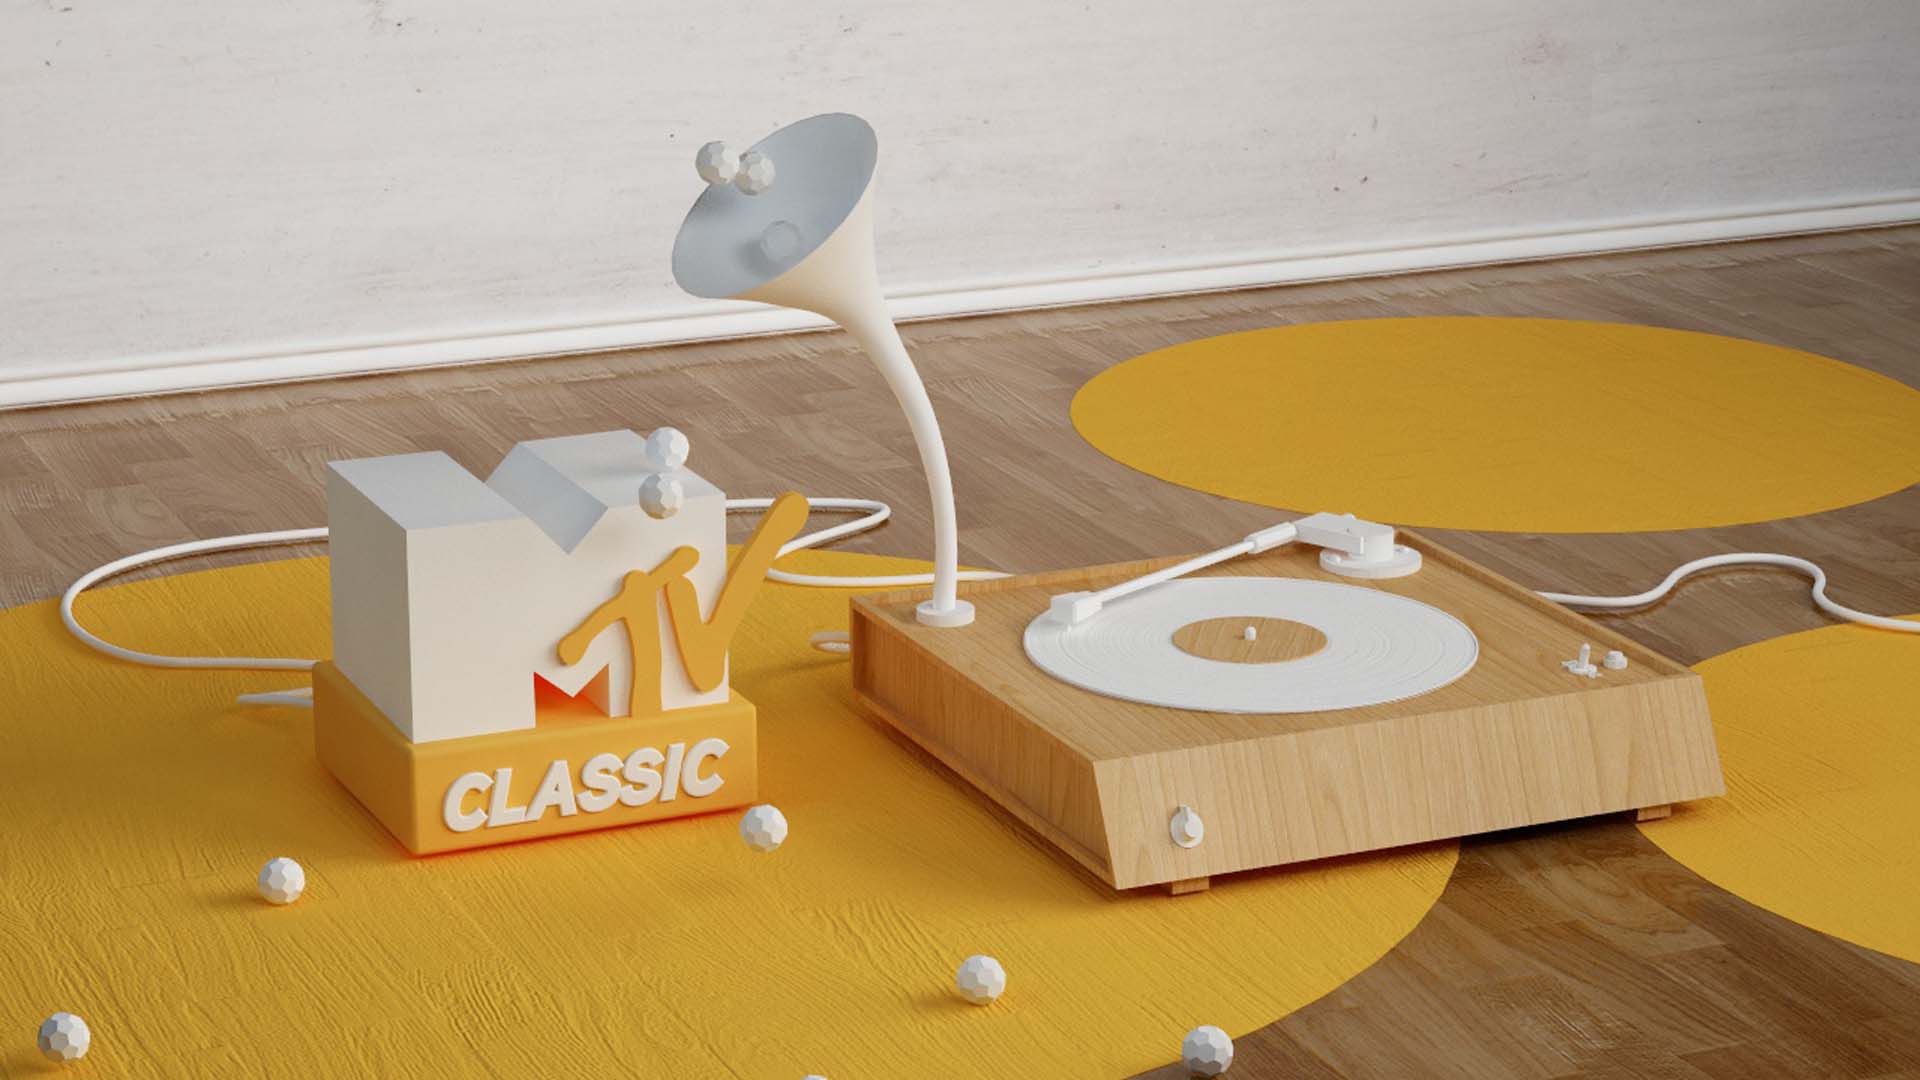 design-motion-3d-photography-octane-redshift-art-visual-animation-render-style-graphic-digital-mtv-music-pop-wood-clay-bump-advertising-tv-vray-classic-orange-wall-setdesign-gramophone-vynil